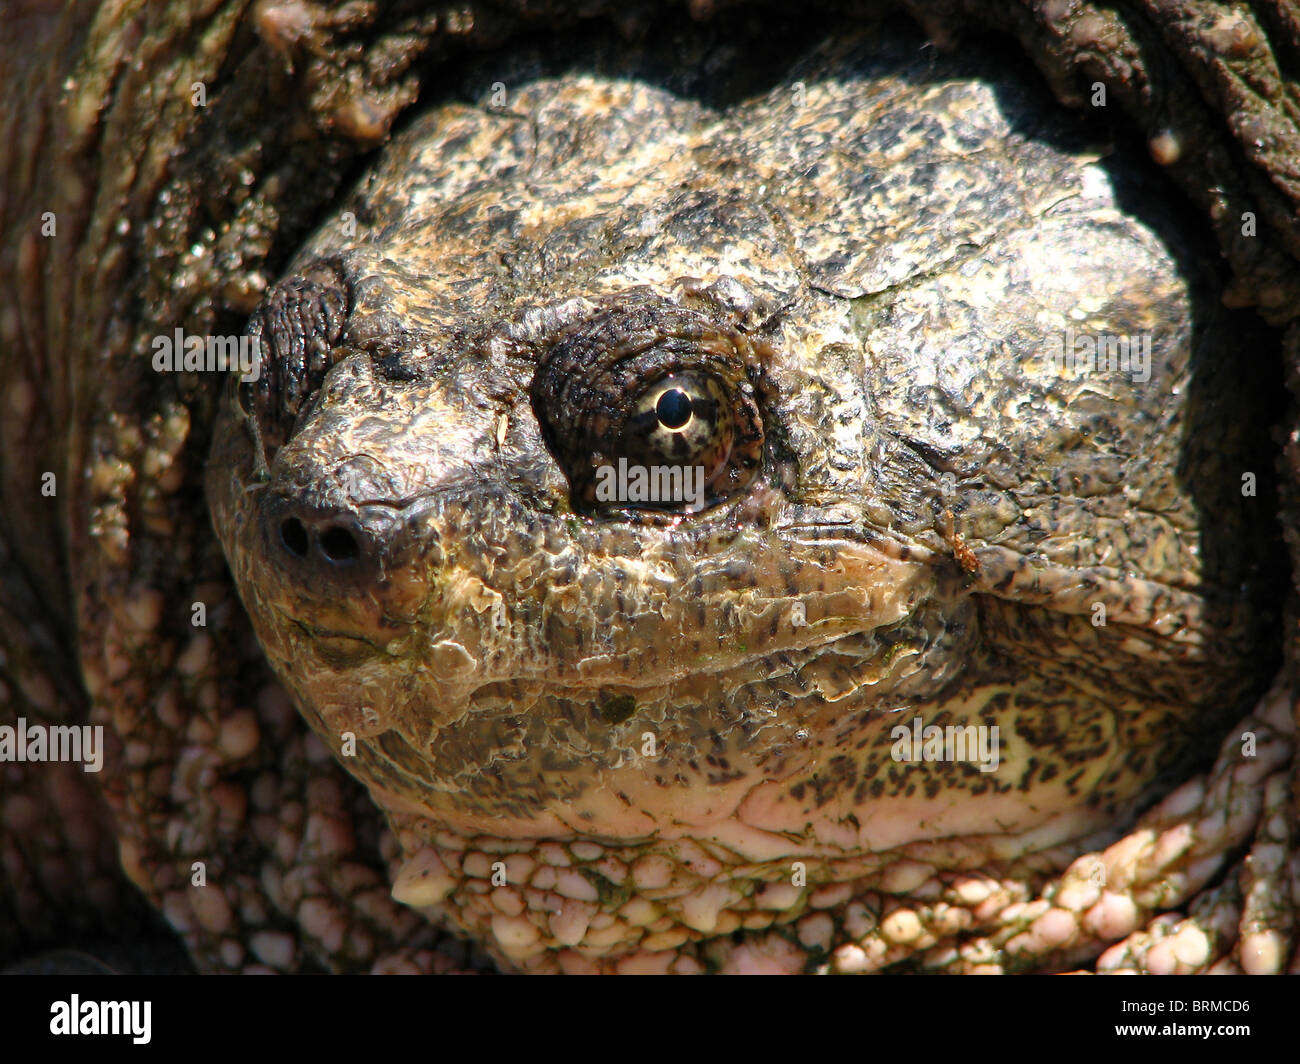 An Adult Female Common Snapping Turtle (Chelydra serpentina) Stock Photo